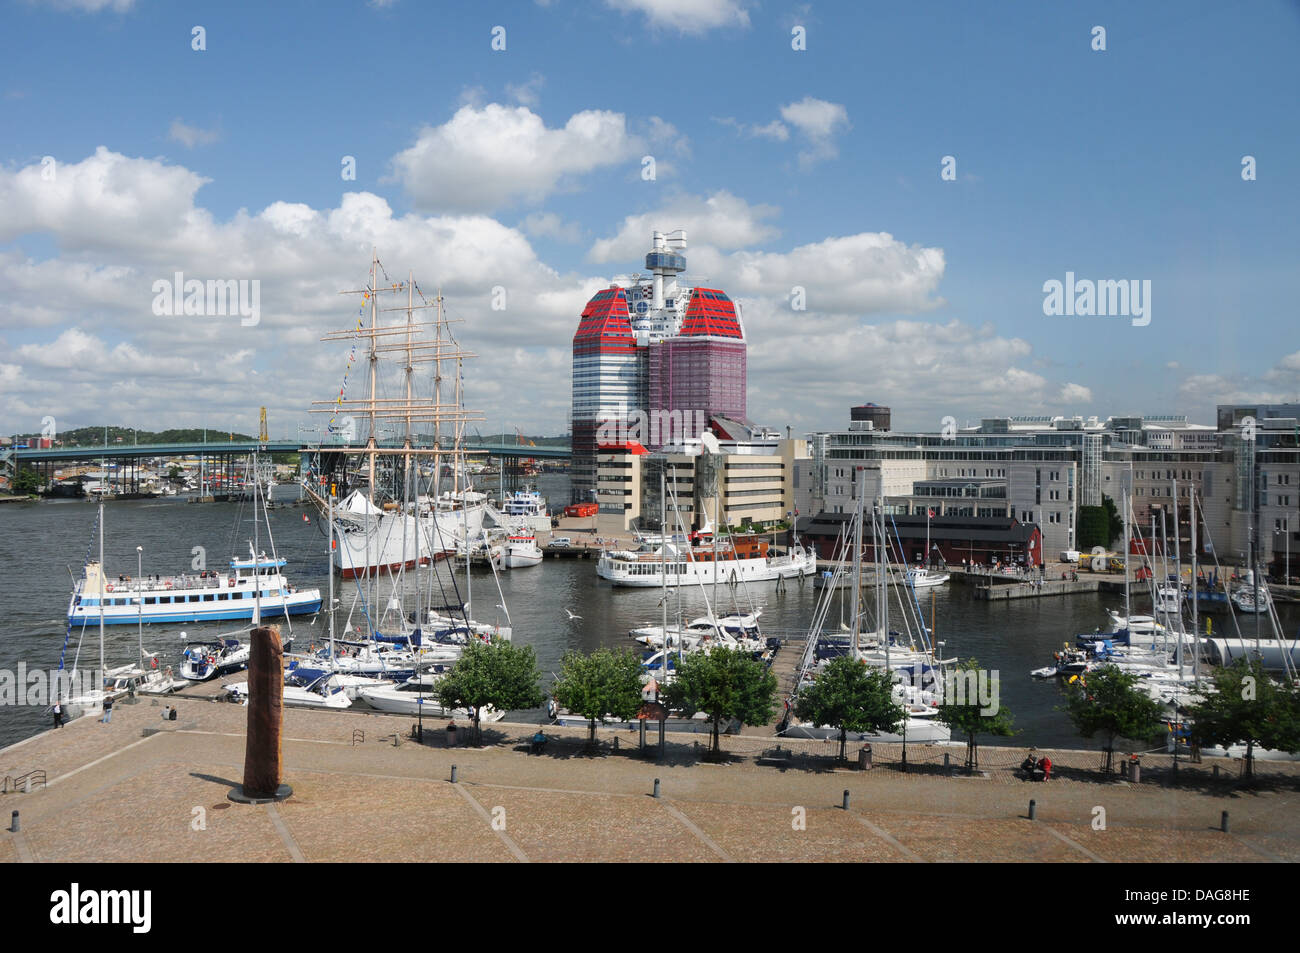 Overview of the 'Viking' schooner at Lilla Bommens Torg in Gothenburg or Goteborg on the West Coast of  Sweden Stock Photo